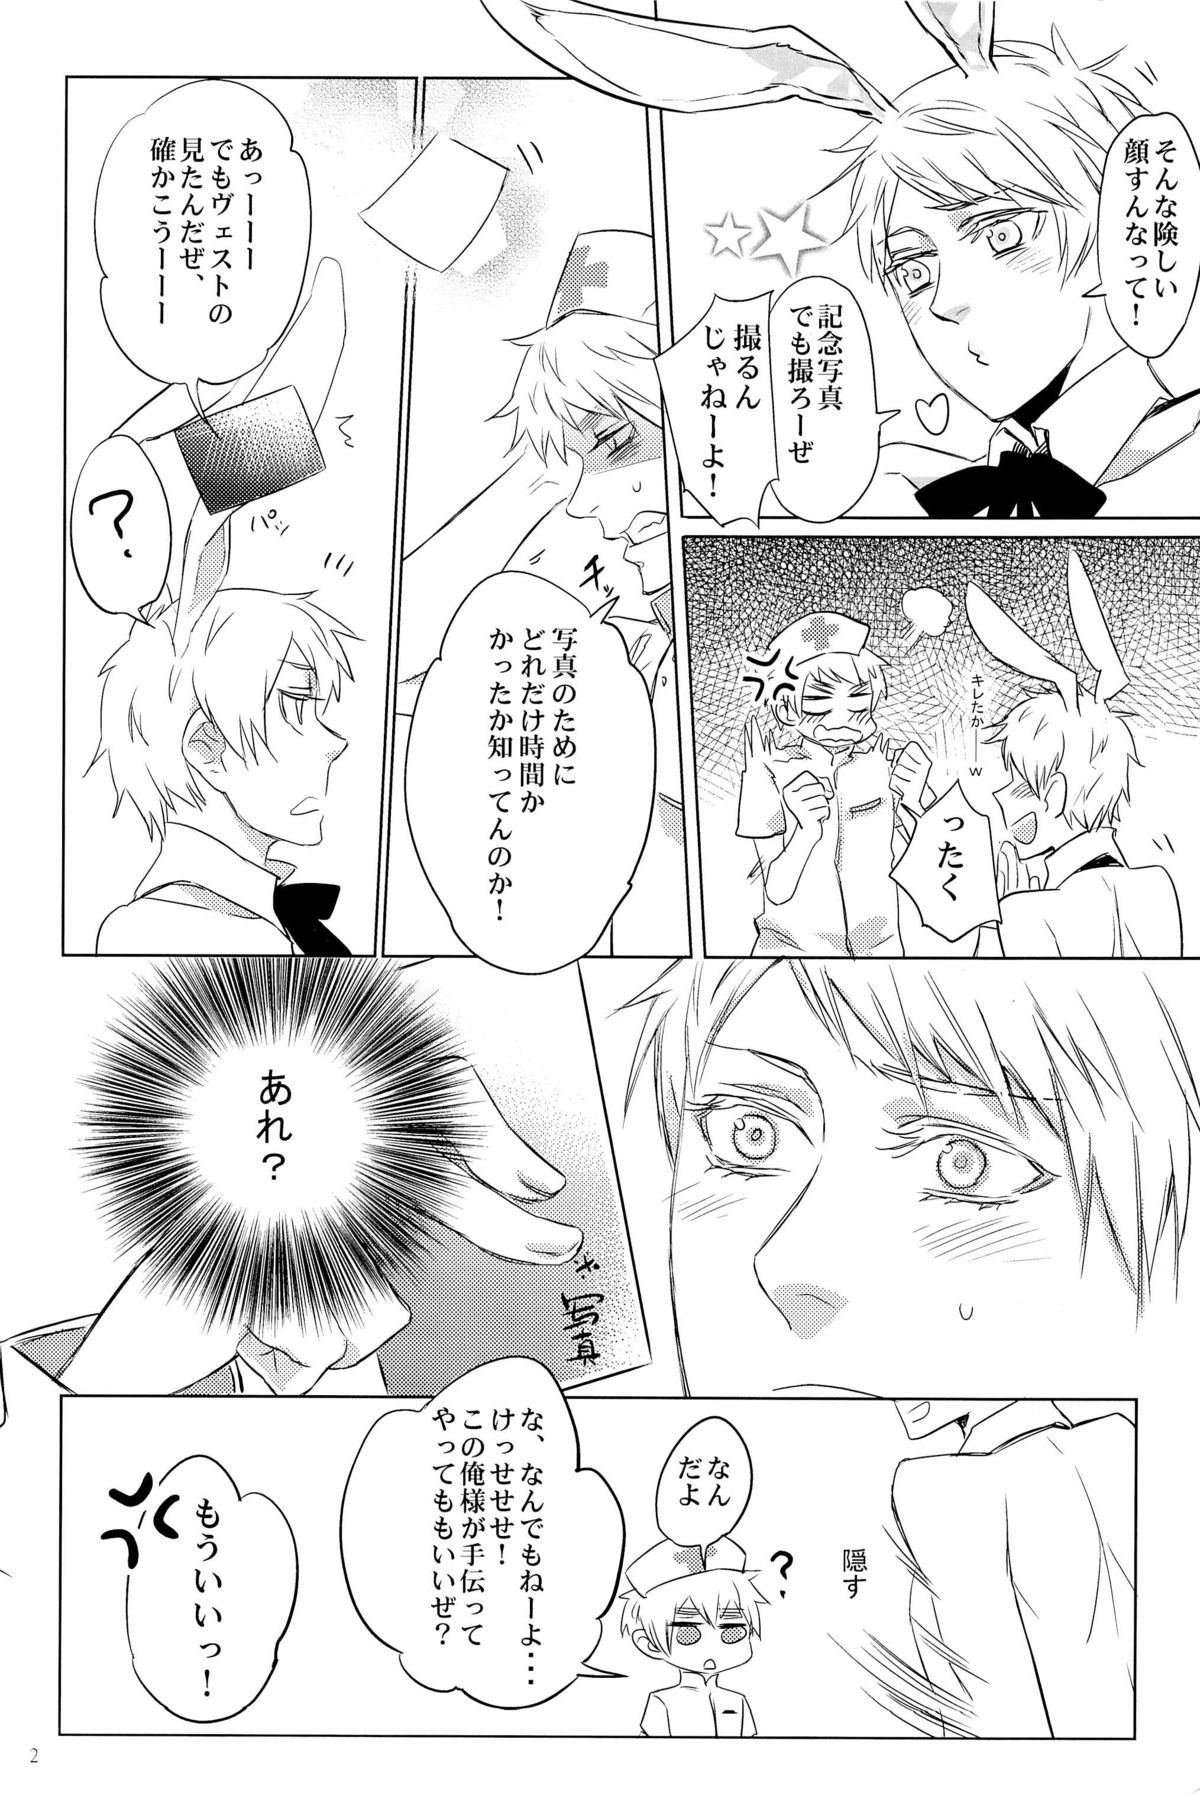 [Shout for Love (Bee)] Doddy Bunny (Hetalia) page 6 full